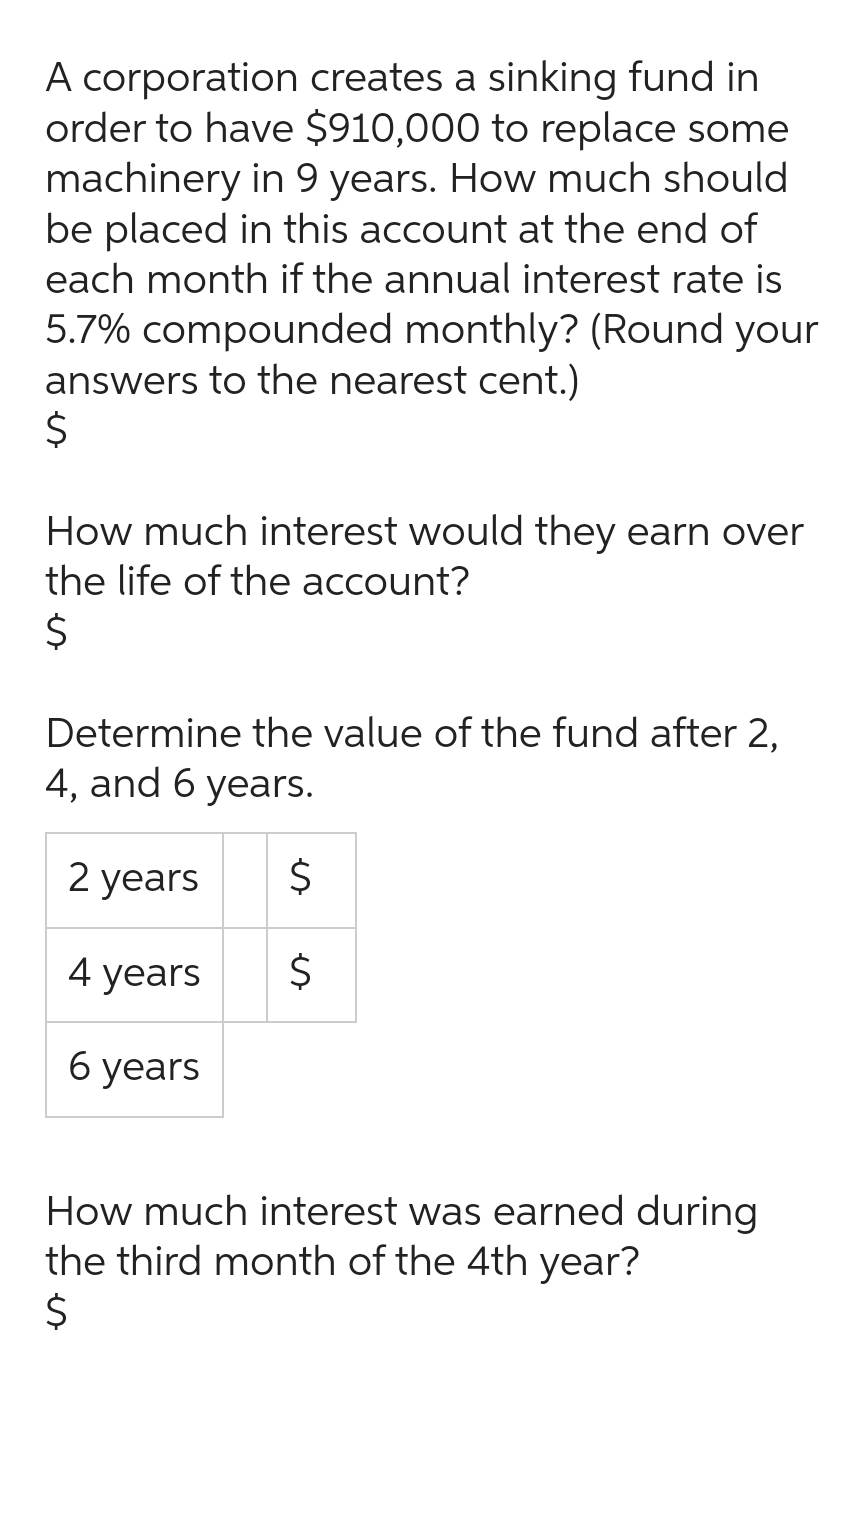 A corporation creates a sinking fund in
order to have $910,000 to replace some
machinery in 9 years. How much should
be placed in this account at the end of
each month if the annual interest rate is
5.7% compounded monthly? (Round your
answers to the nearest cent.)
$
How much interest would they earn over
the life of the account?
$
Determine the value of the fund after 2,
4, and 6 years.
$
2 years
4 years
6 years
es
$
How much interest was earned during
the third month of the 4th year?
$